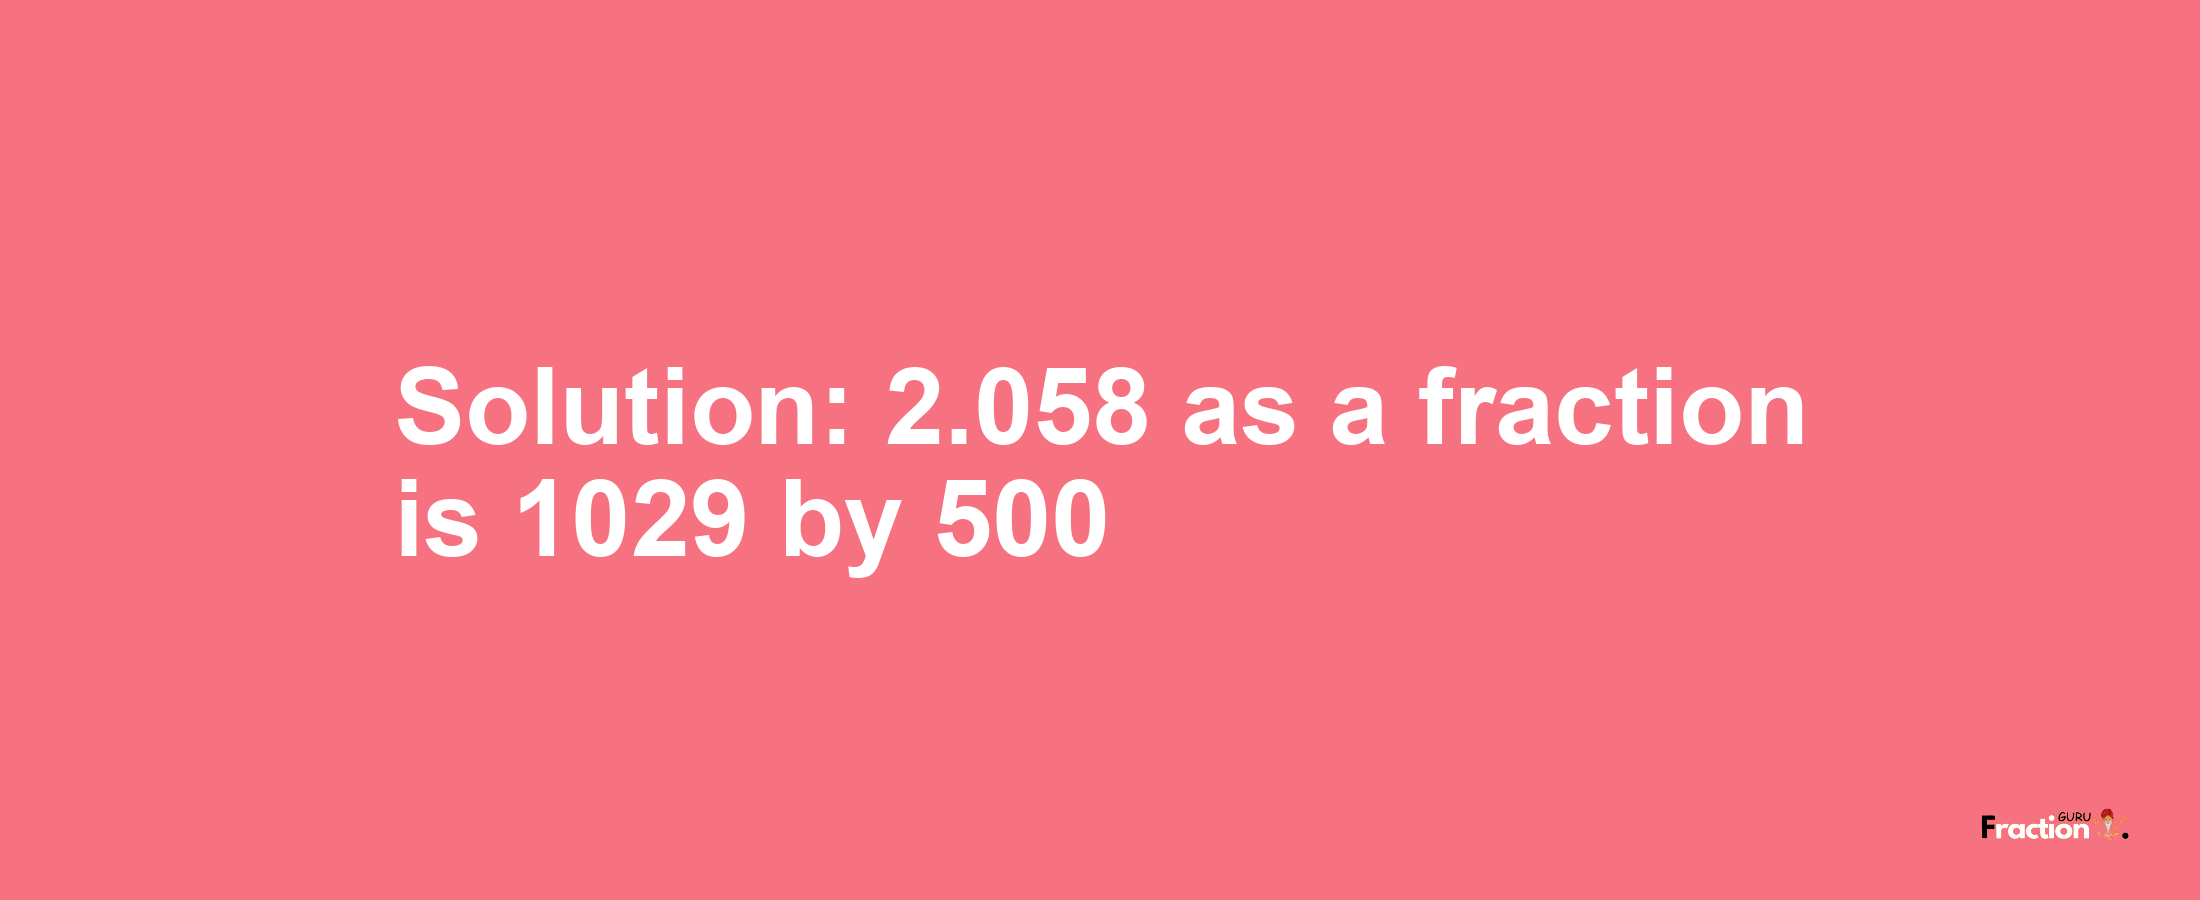 Solution:2.058 as a fraction is 1029/500